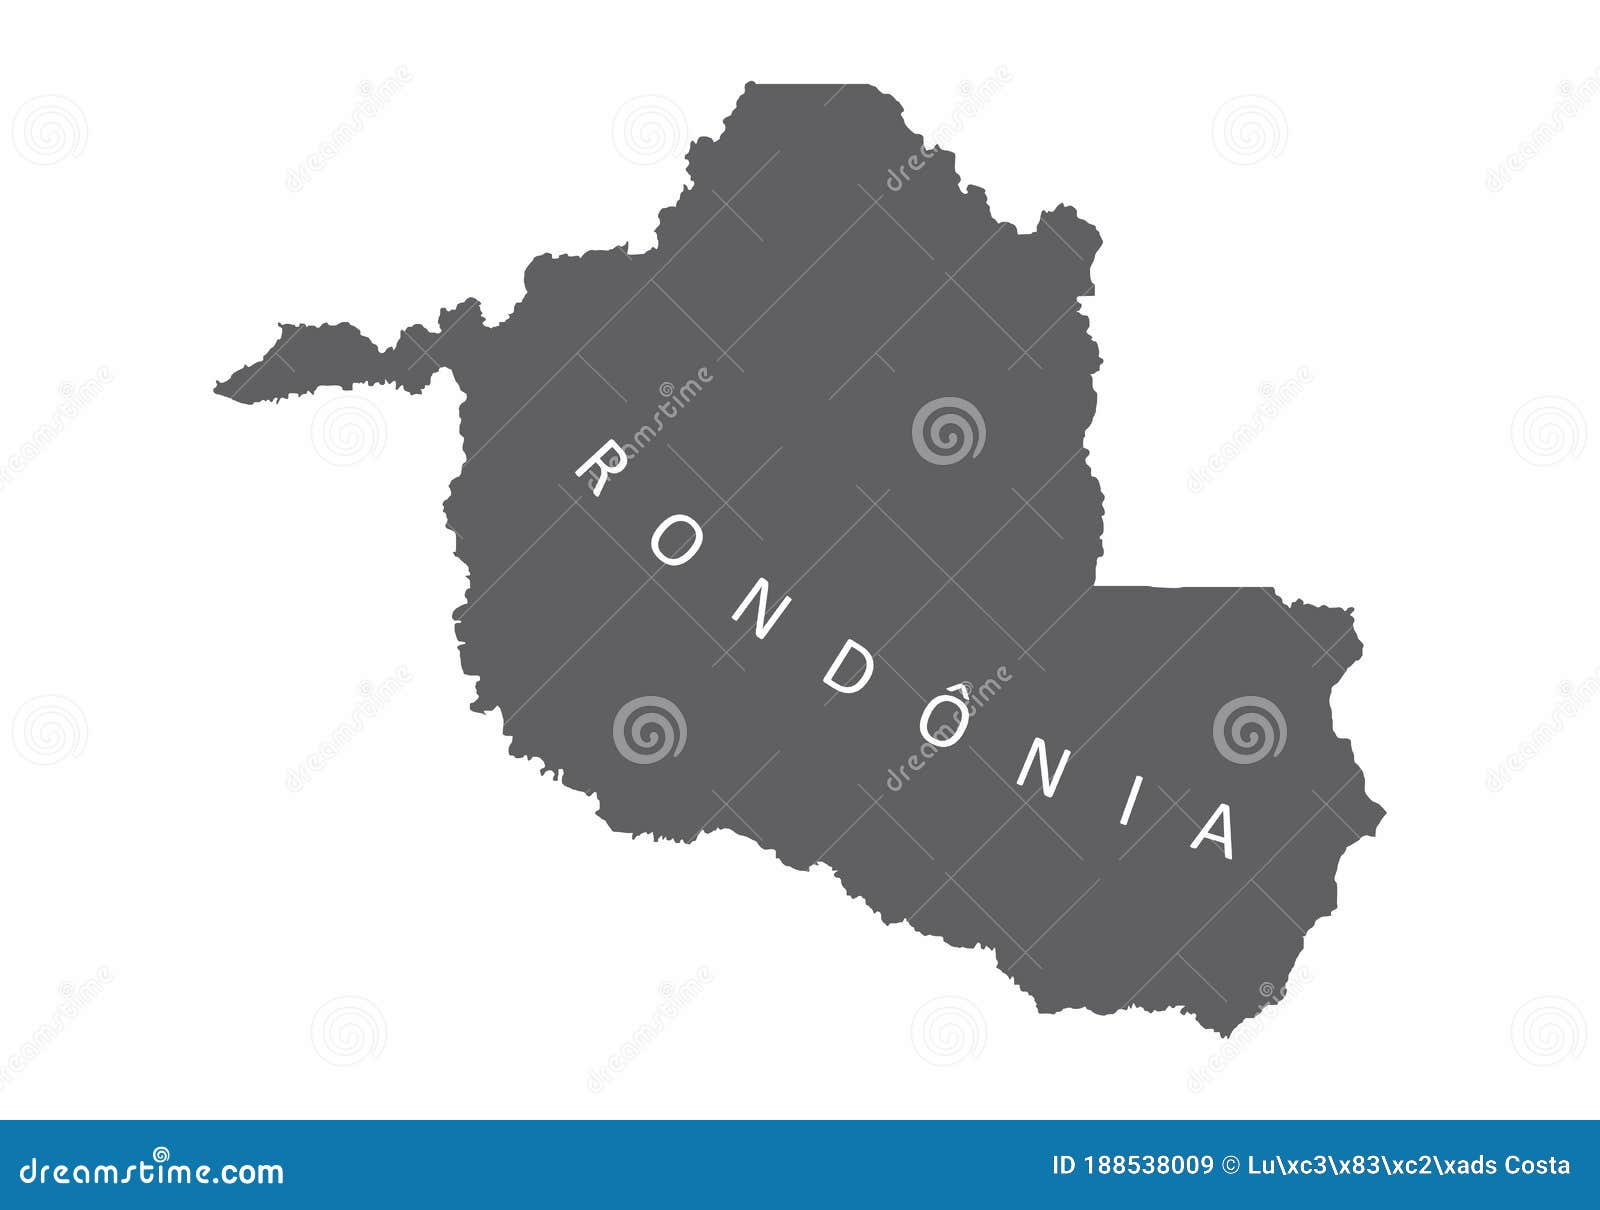 rondonia state map silhouette